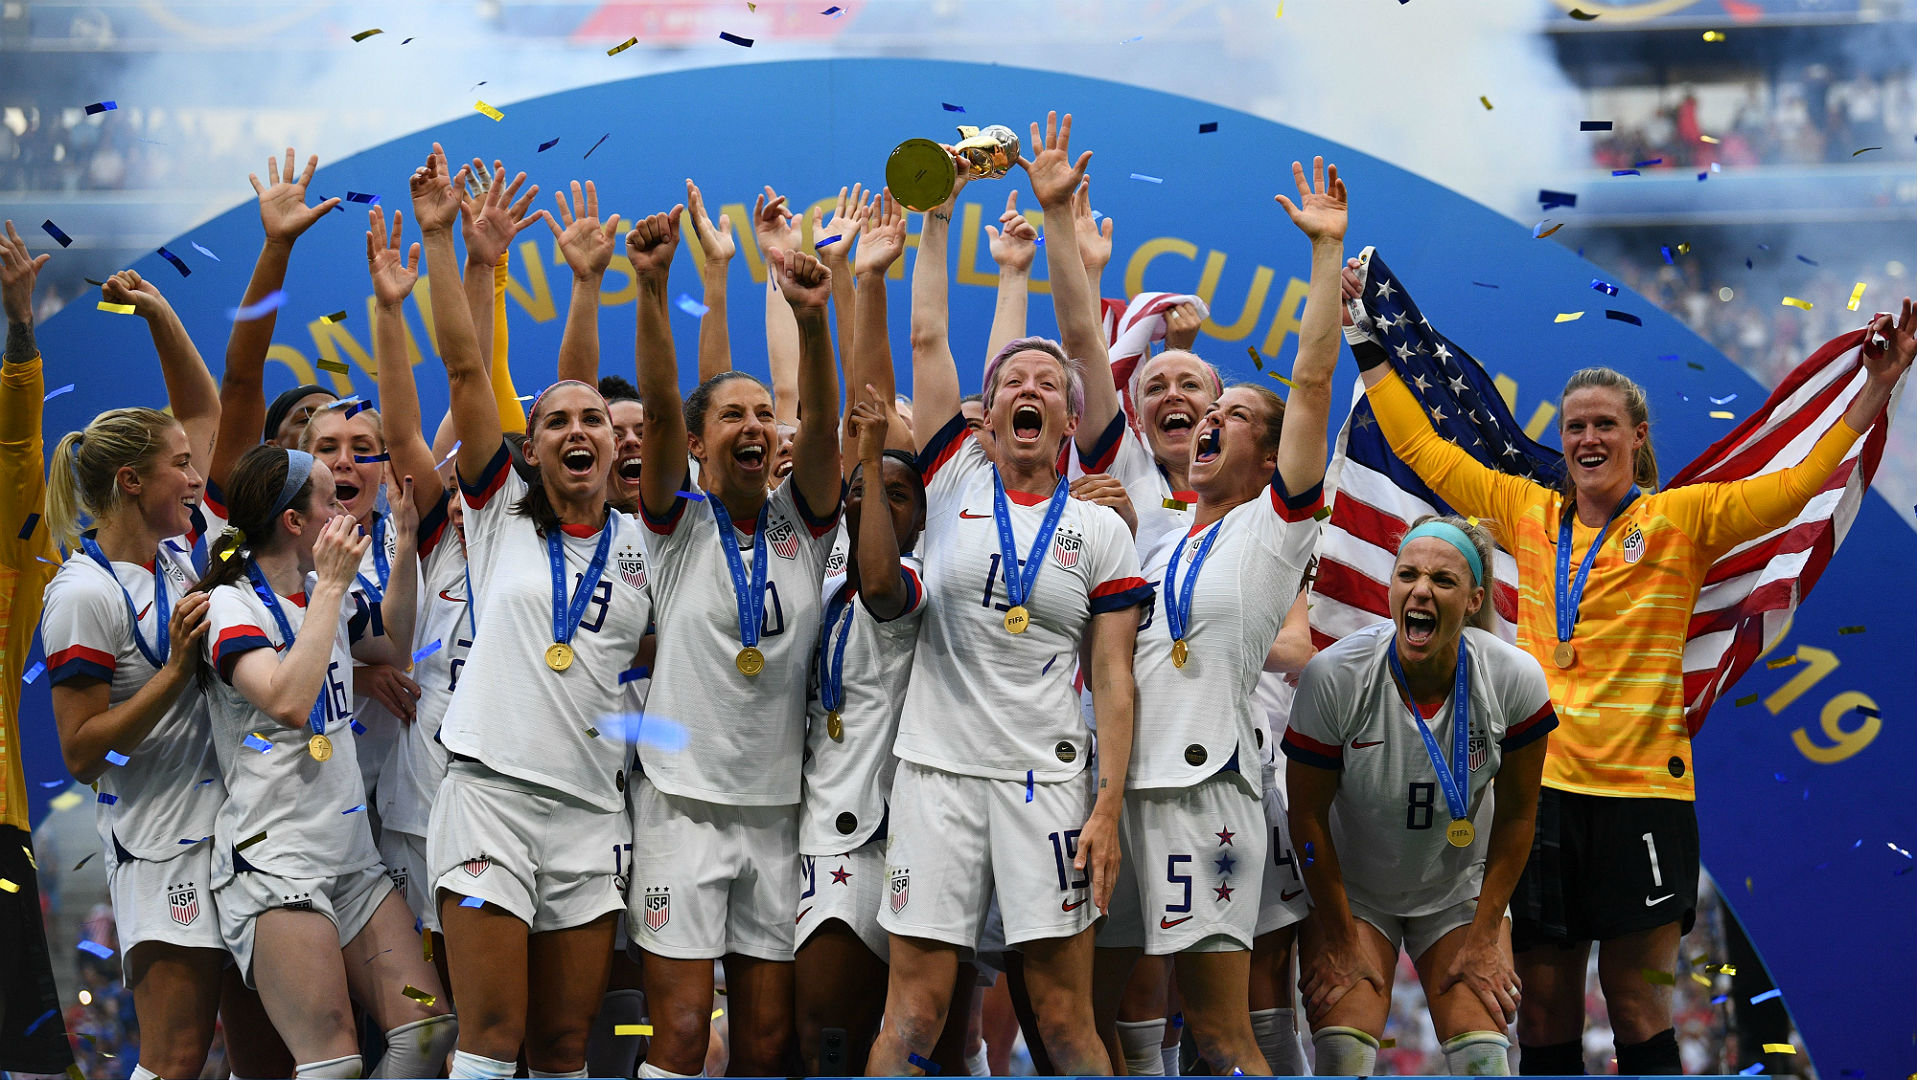 USWNT vs. Netherlands results: USA win historic fourth World Cup title